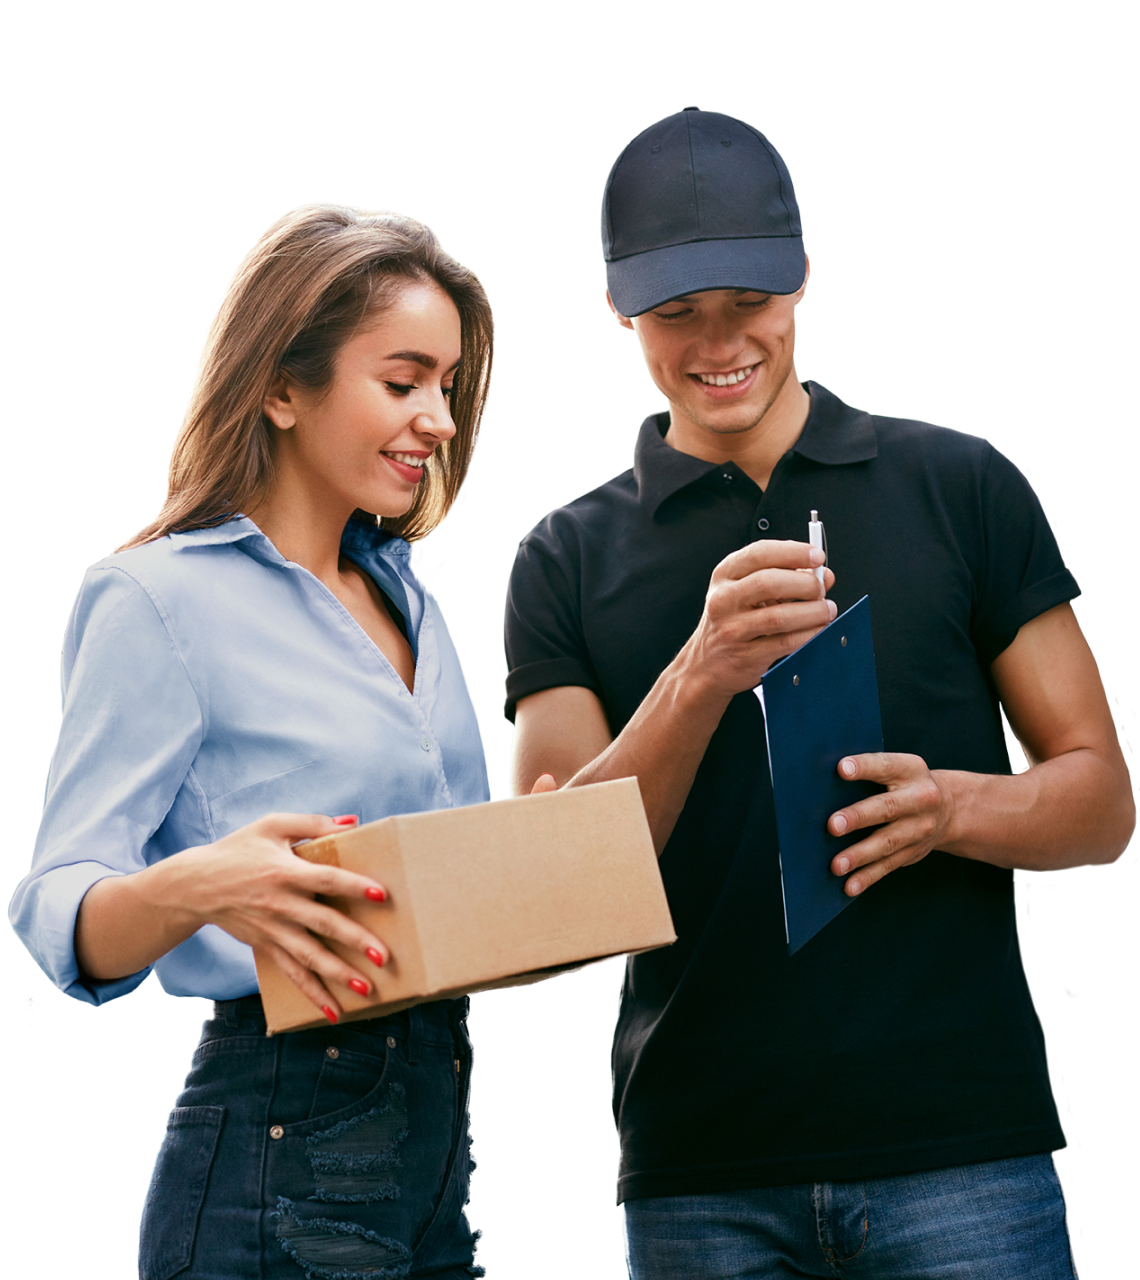 Fastest courier service in India - couriers with a box - borzo delivery